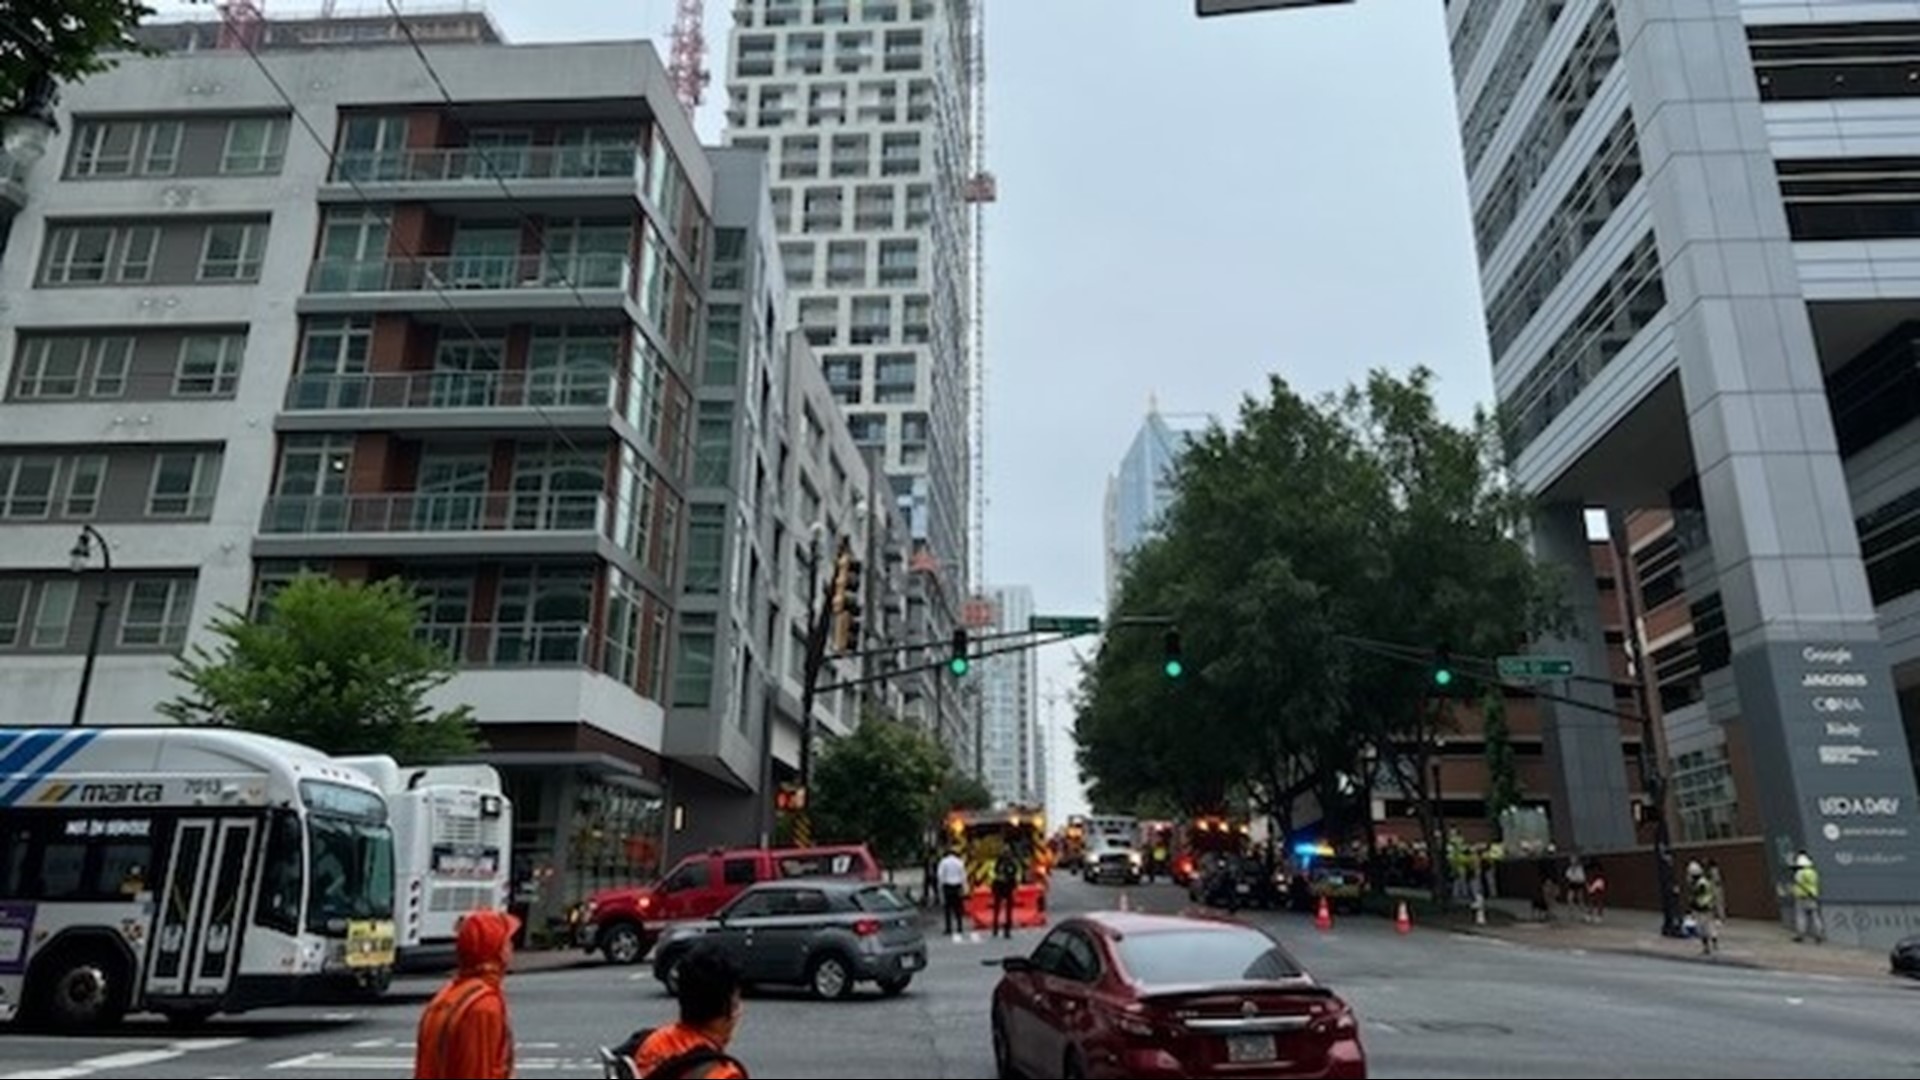 Atlanta Mayor Andre Dickens and responding agencies held a press conference early Tuesday morning to give an update after a crane collapsed into a Midtown building.